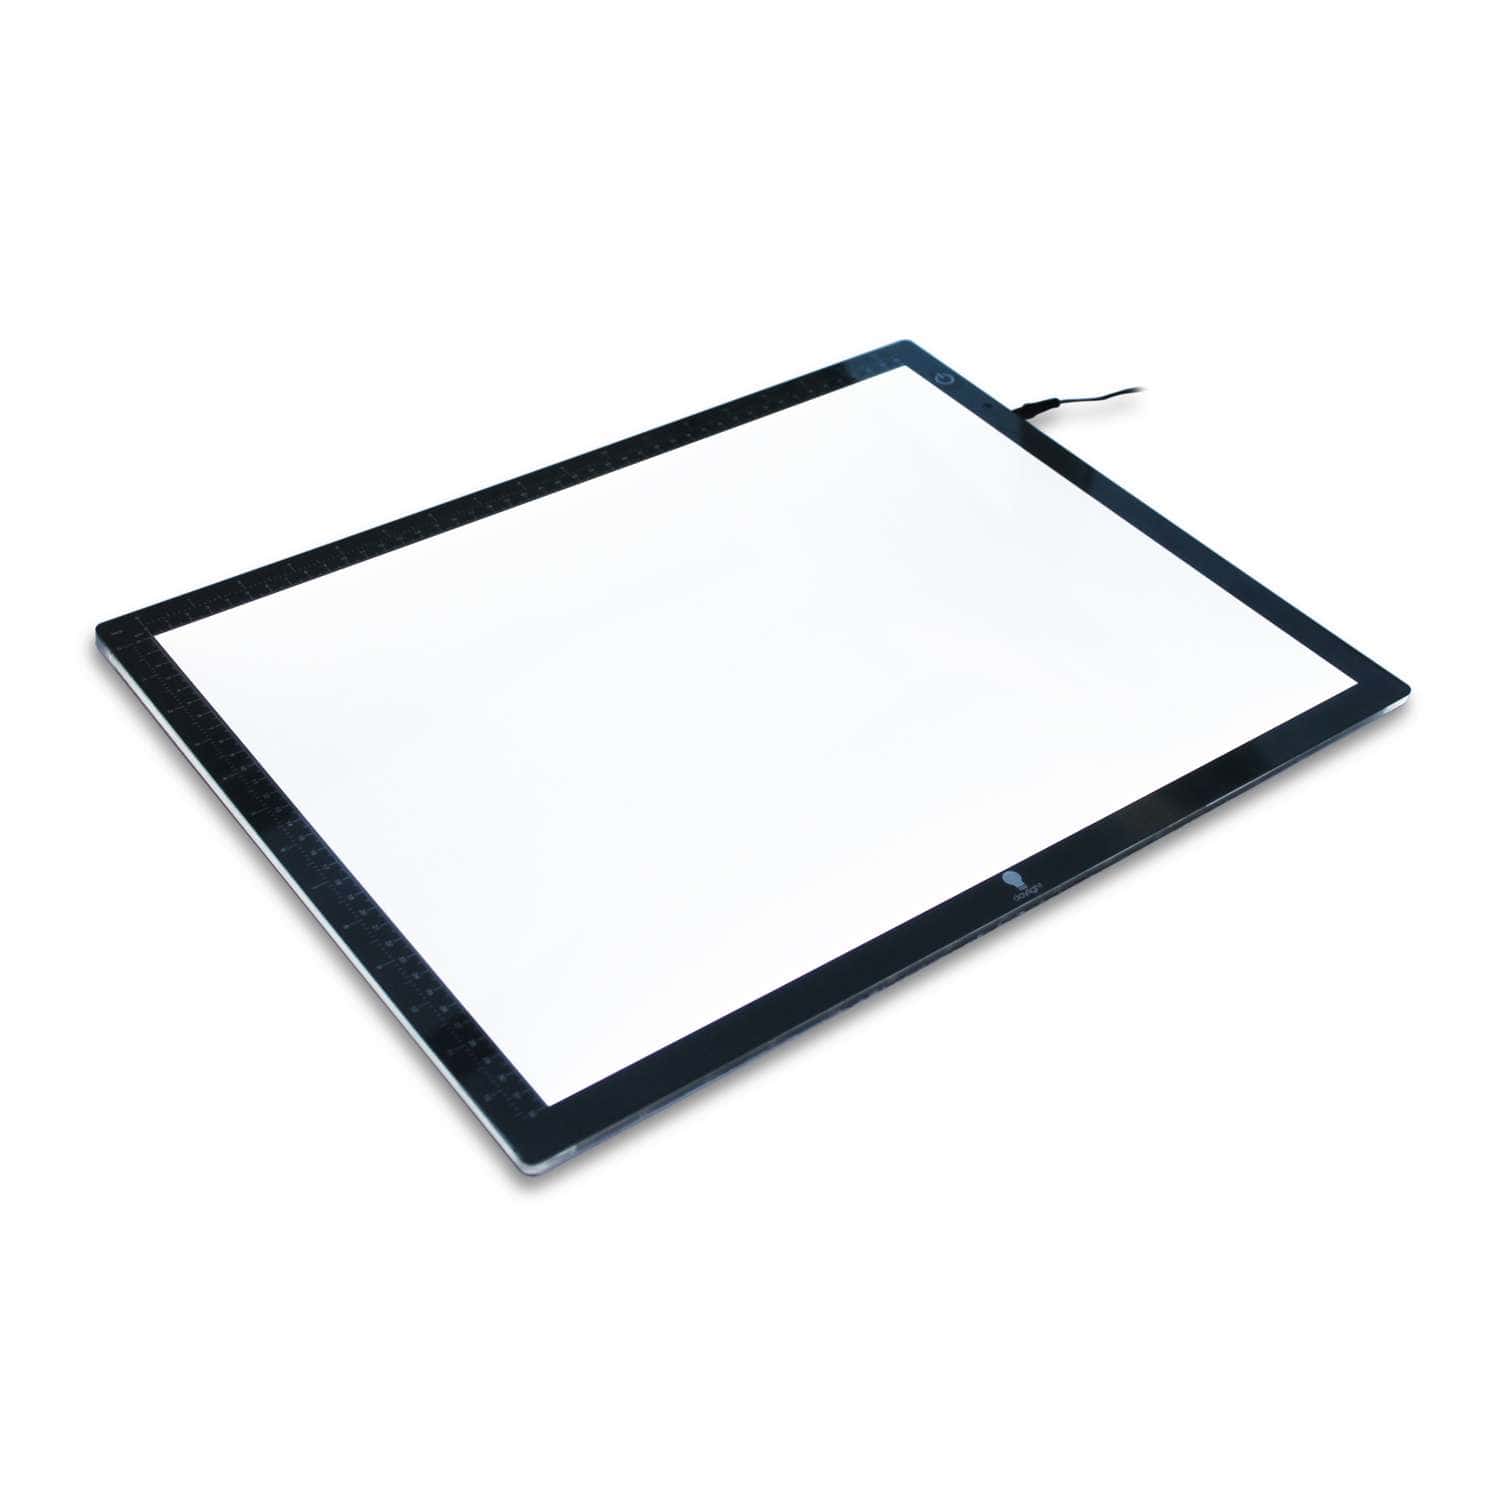 Tablette lumineuse extra-fine A3